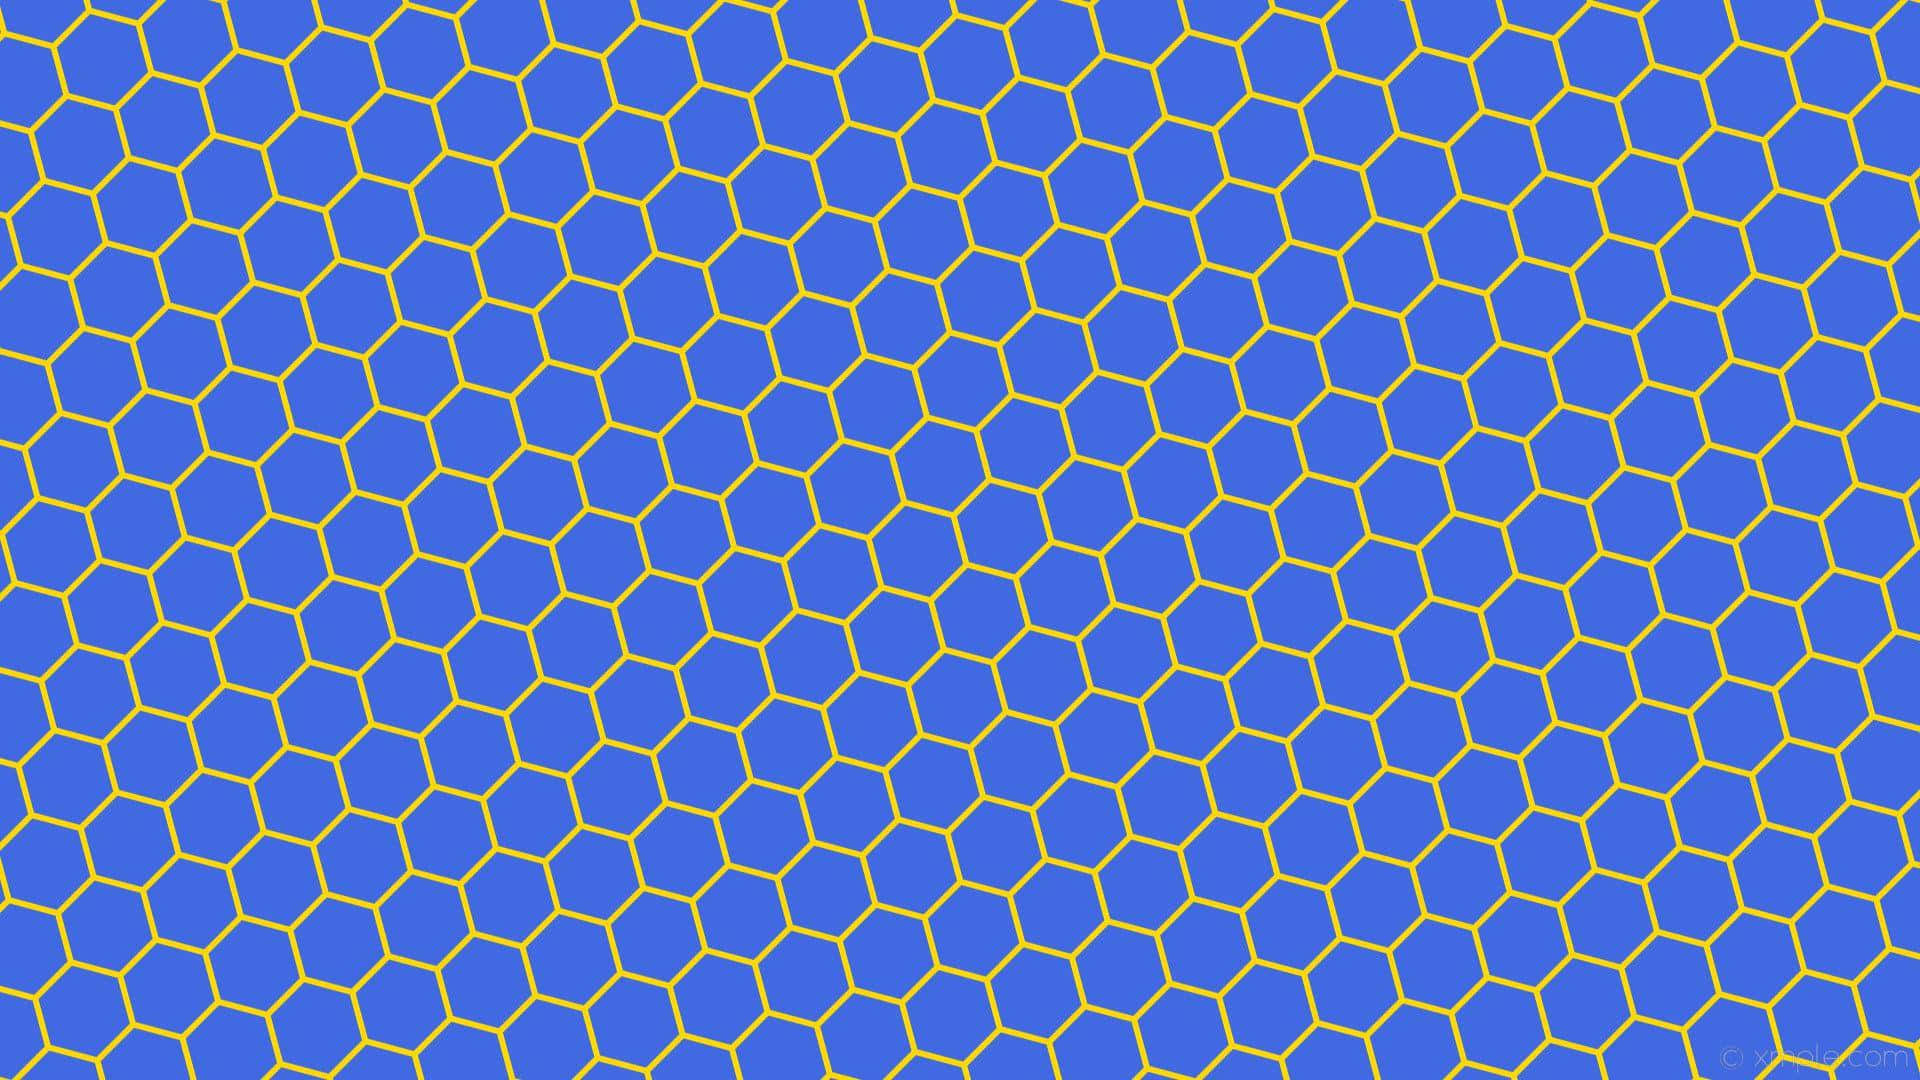 A Blue And Yellow Hexagonal Pattern